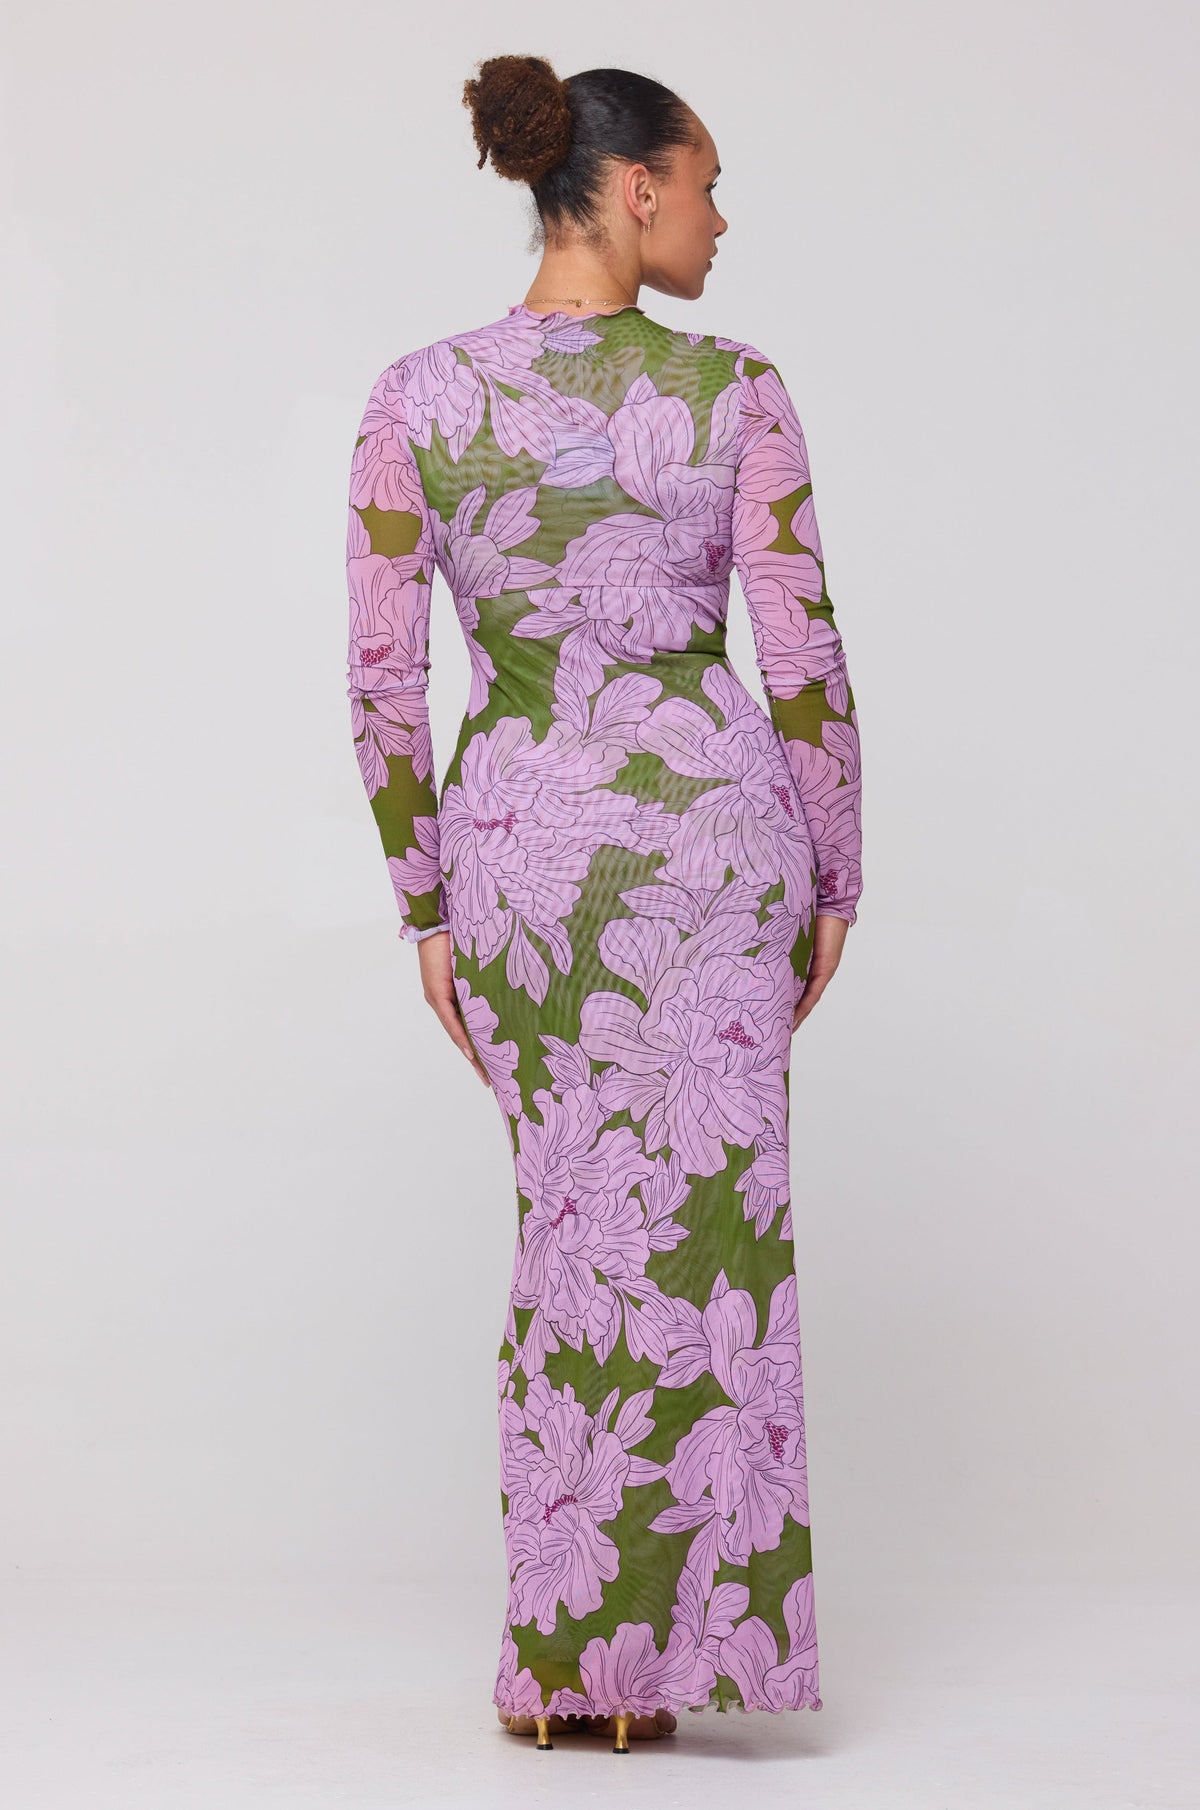 This is an image of Audrey Dress in Aster - RESA featuring a model wearing the dress